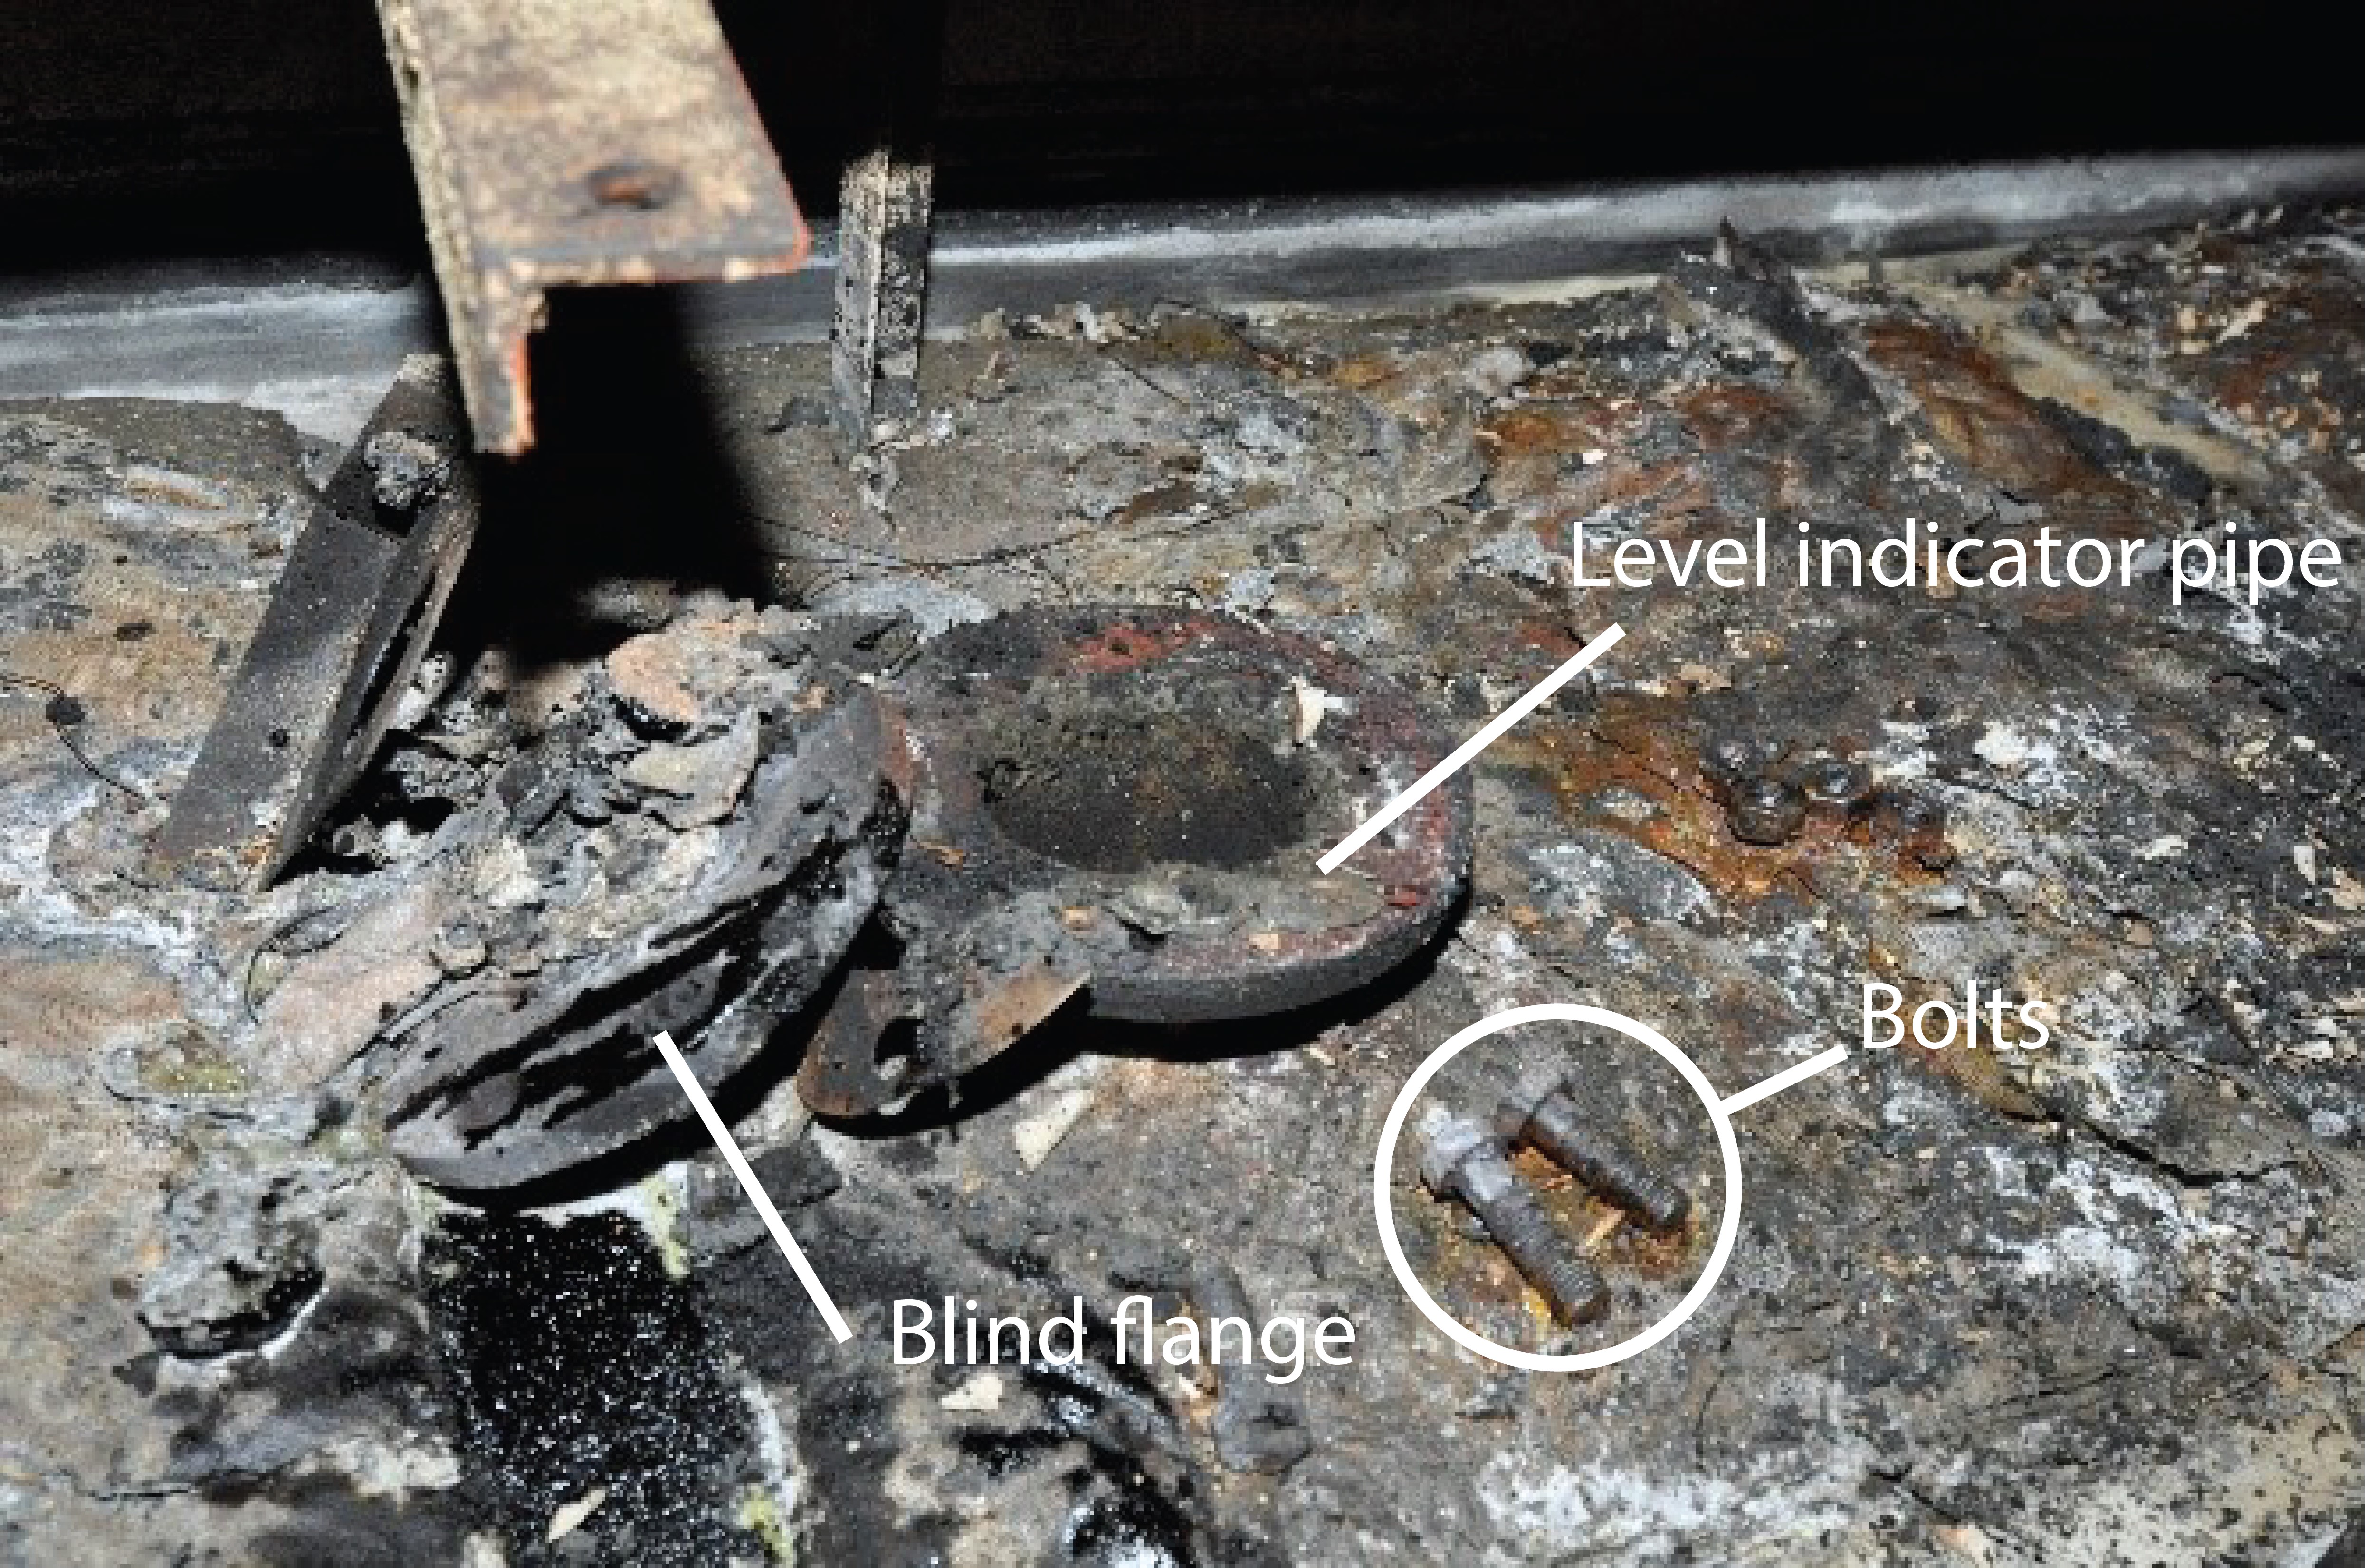 Opening of the level indicator pipe on top of the settling tank as found post-fire. Also shown are the blind flange, nuts, and bolts on top of the tank. (Source: TSB)